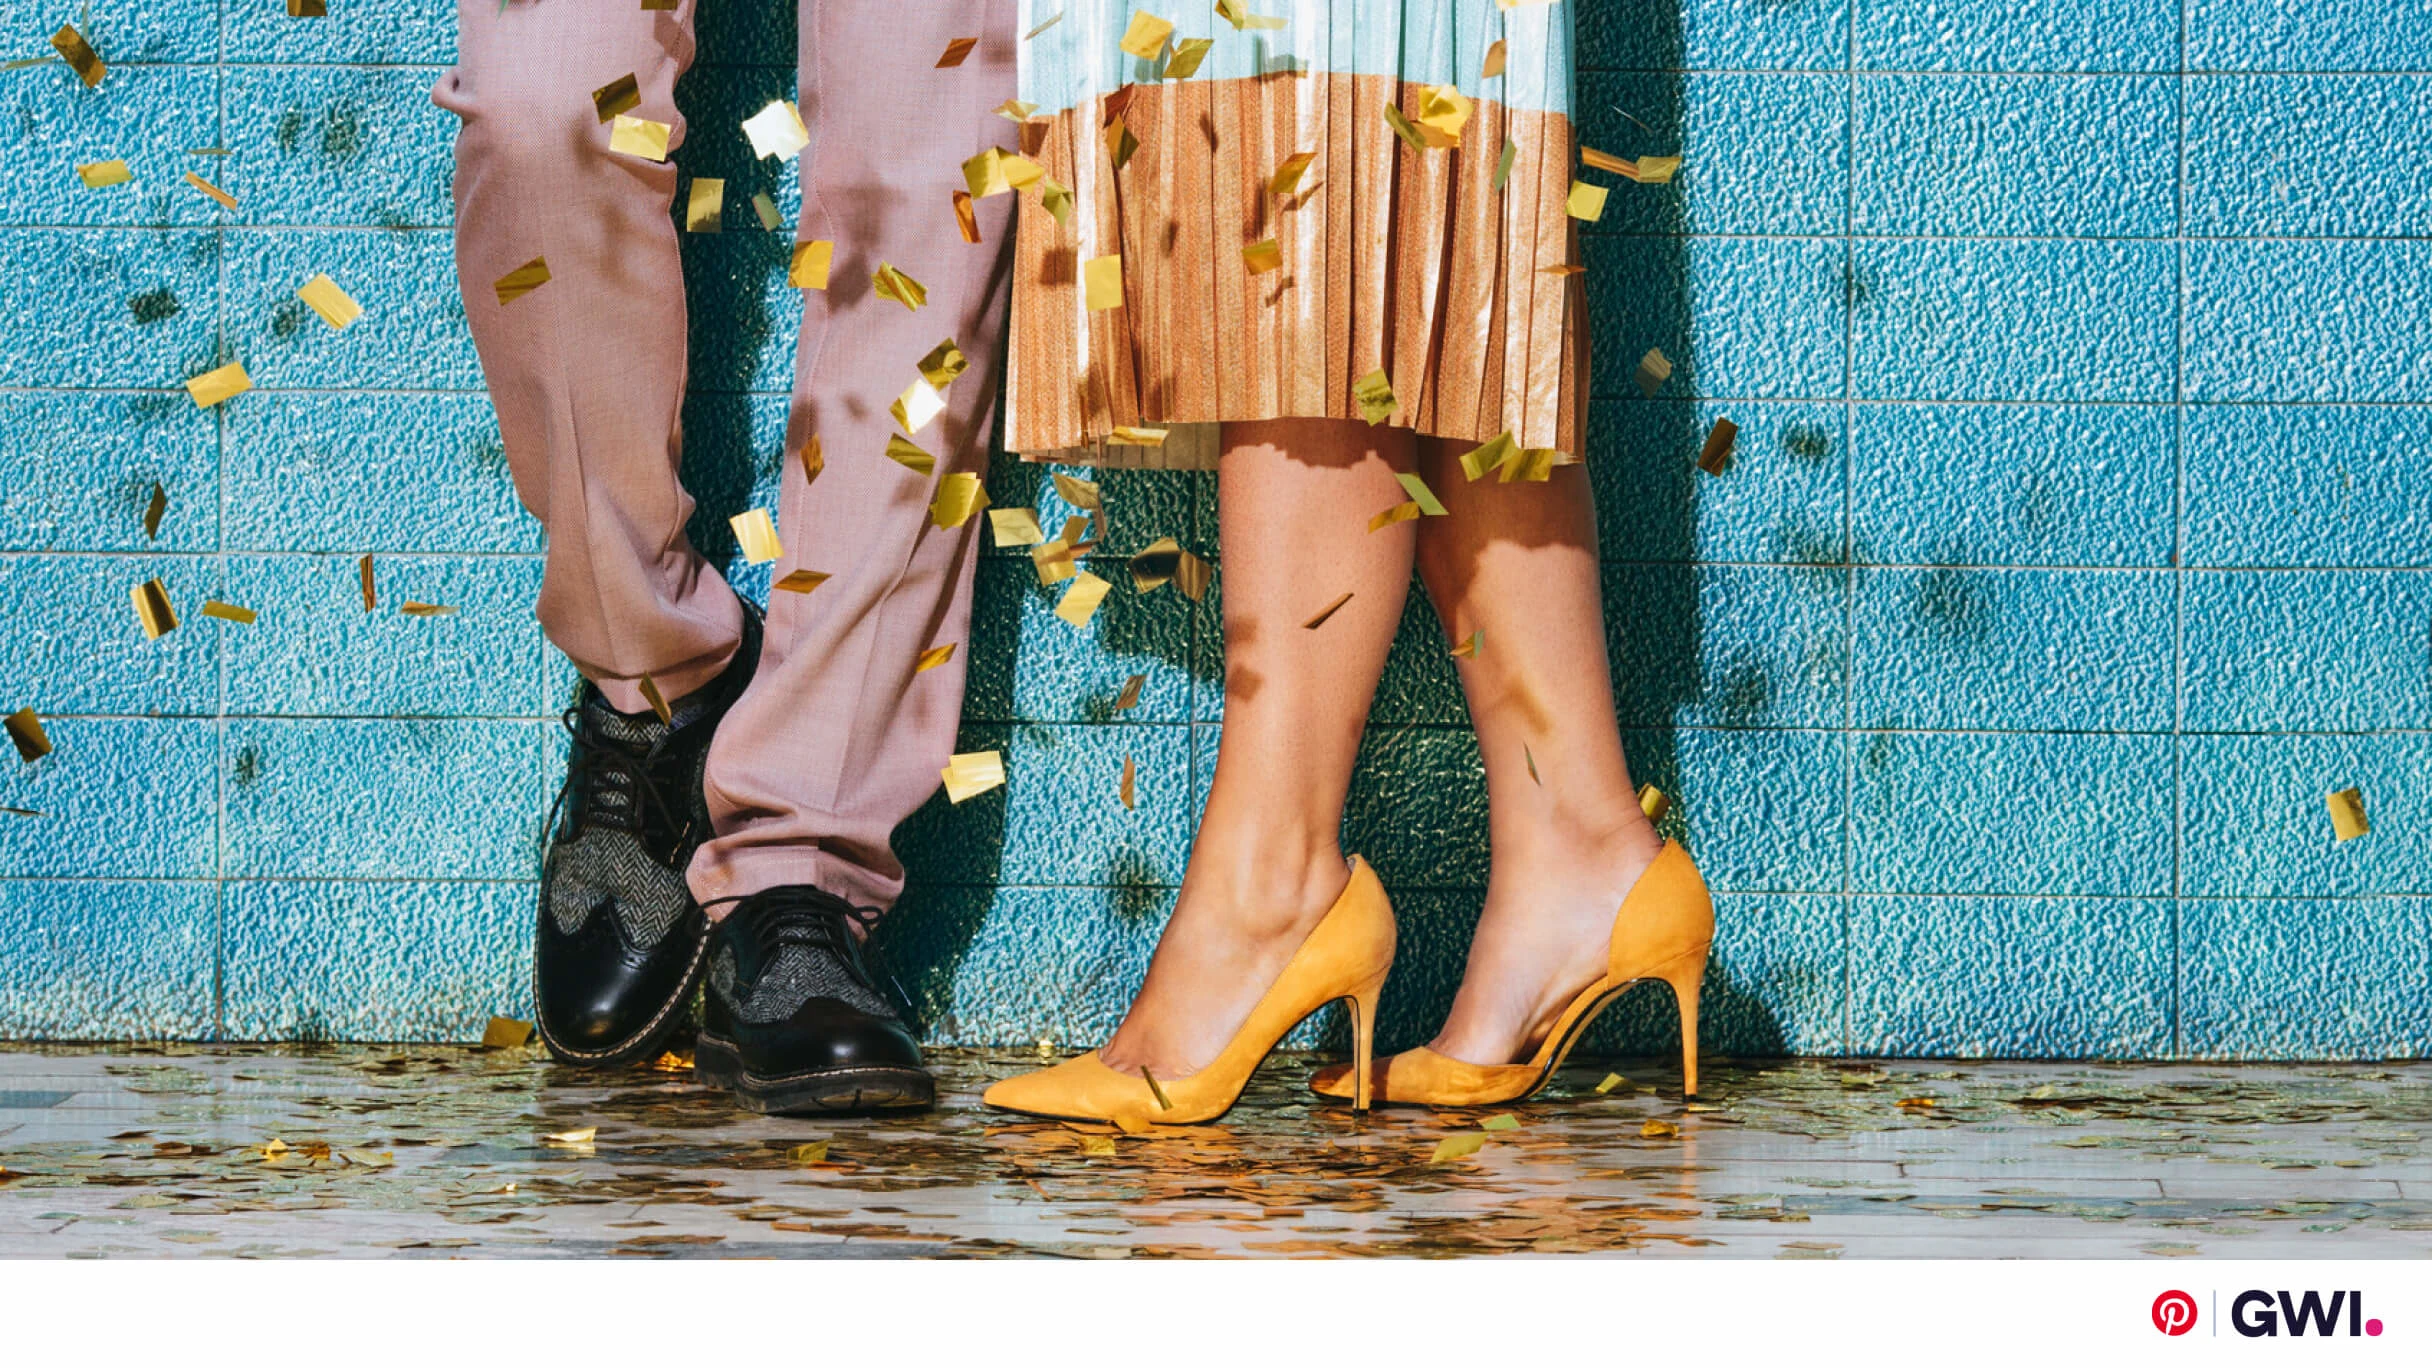 Legs of two people standing next to each other against a blue wall, surrounded by confetti. The person on the left is wearing salmon-color trousers and black dress shoes. The person on the right is wearing a two-toned skirt and yellow heels.